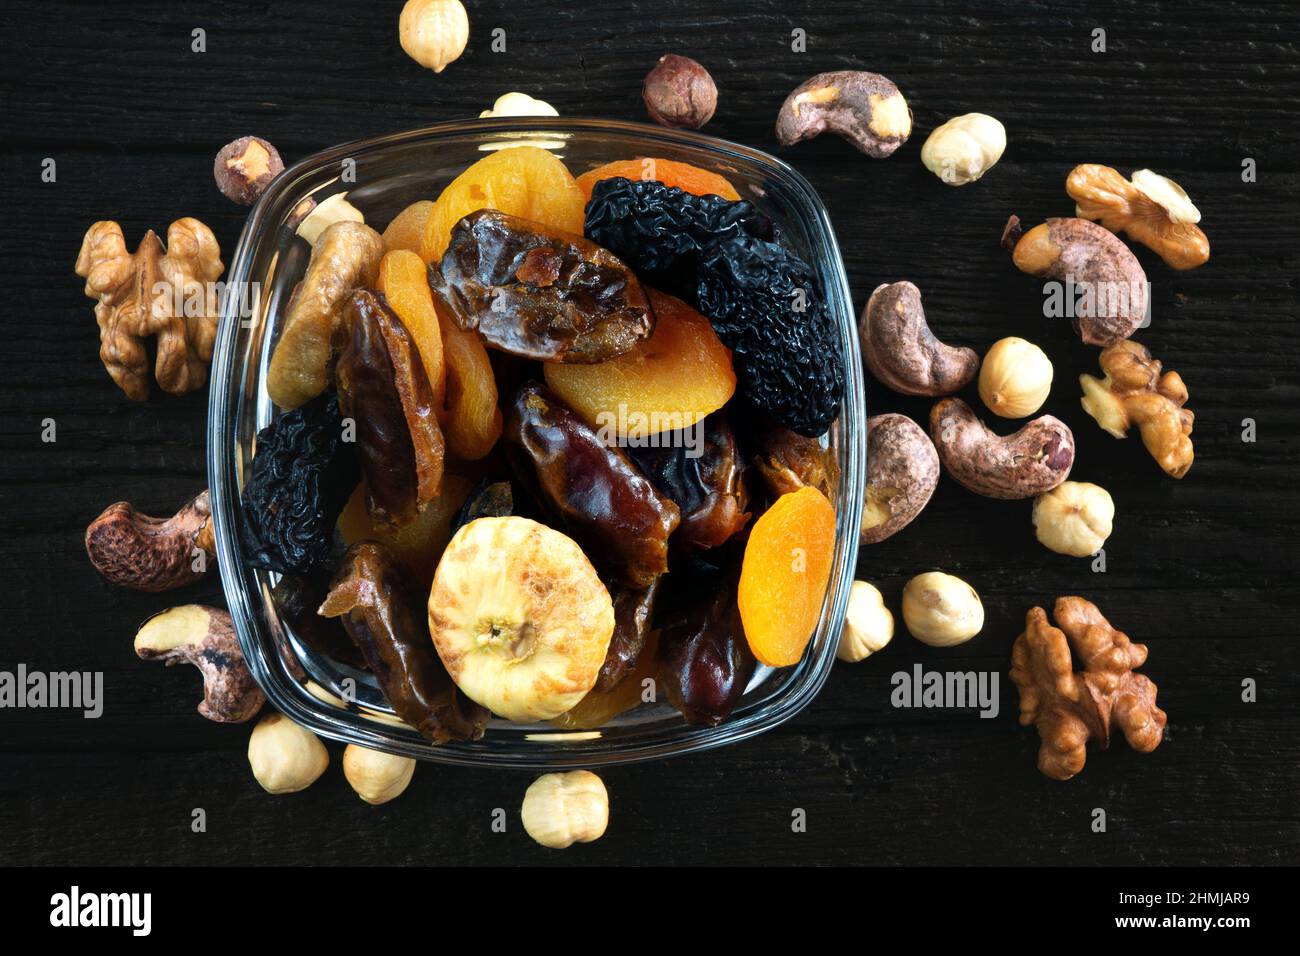 Dried fruits and nuts on old wooden table Stock Photo